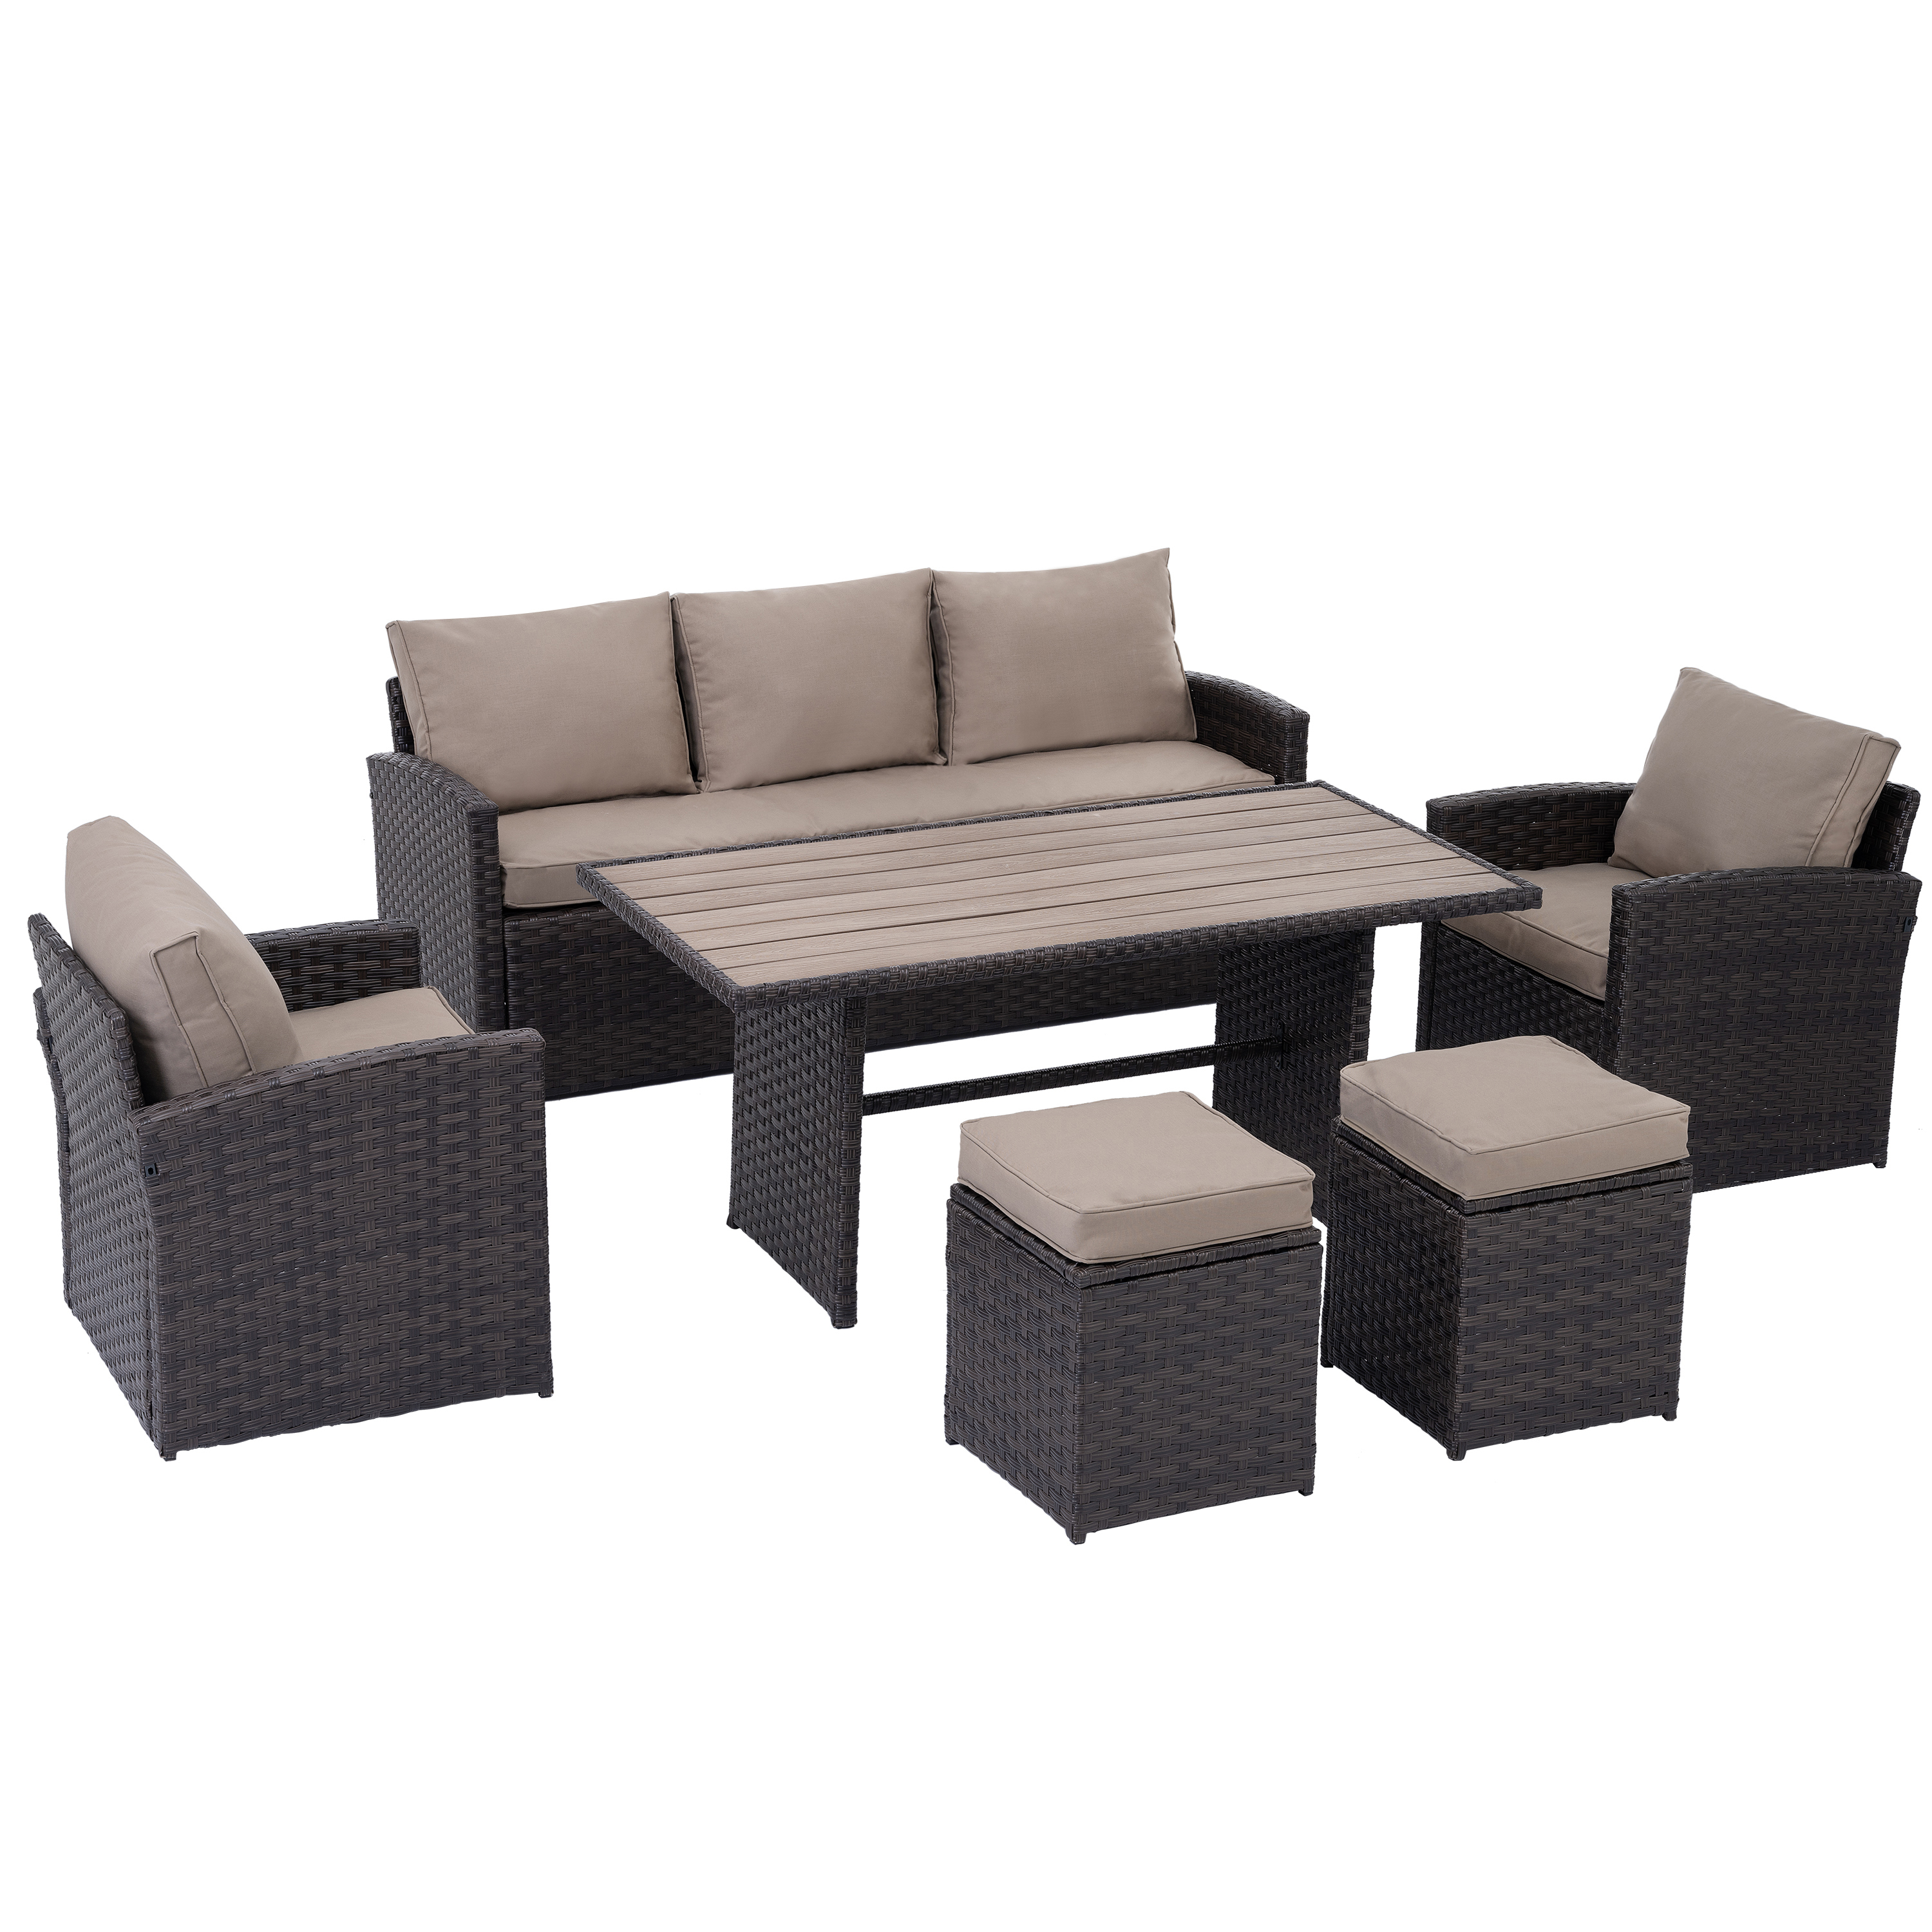 Patio Rattan Dining Table Set, 6 PCS Outdoor PE Wicker Conversation Set, Cushioned Seat Backrest Sofa with 2 Armchair Sofa, 2 Ottoman & Table, Sectional Furniture Set for Garden Porch Deck Patio - image 5 of 9